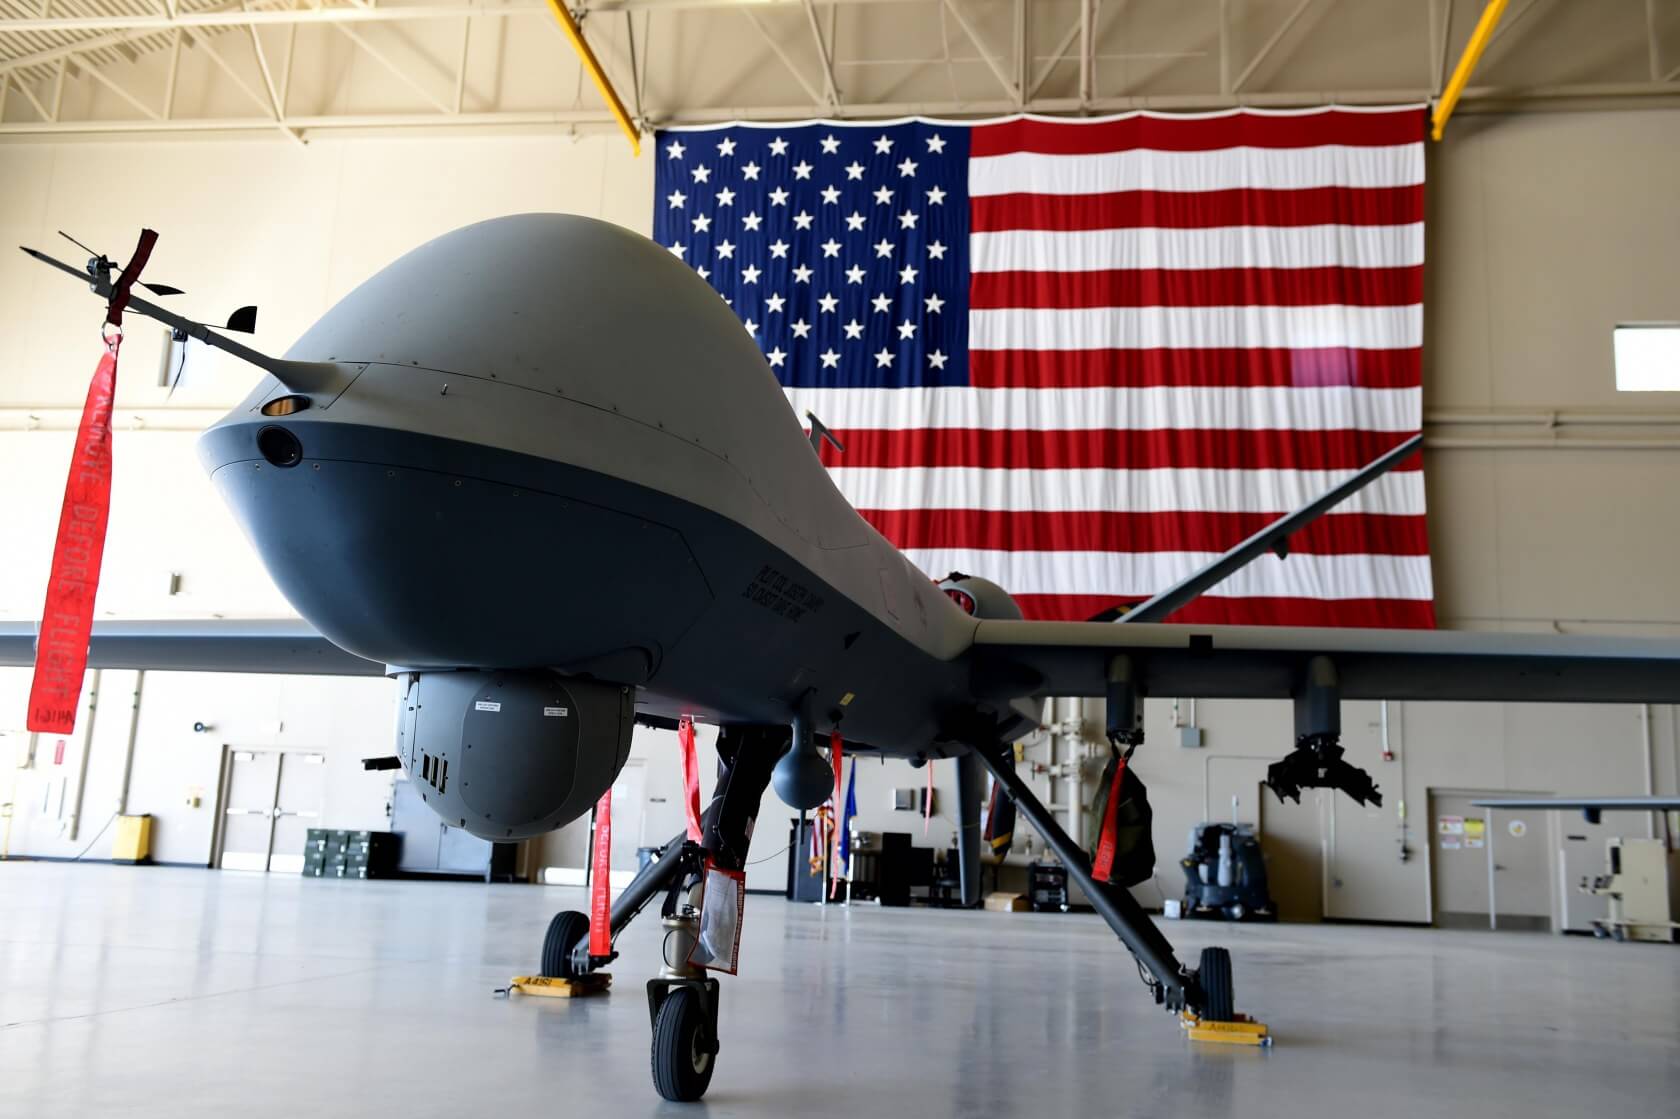 Low-paid workers unknowingly helped Google build controversial AI for military drones